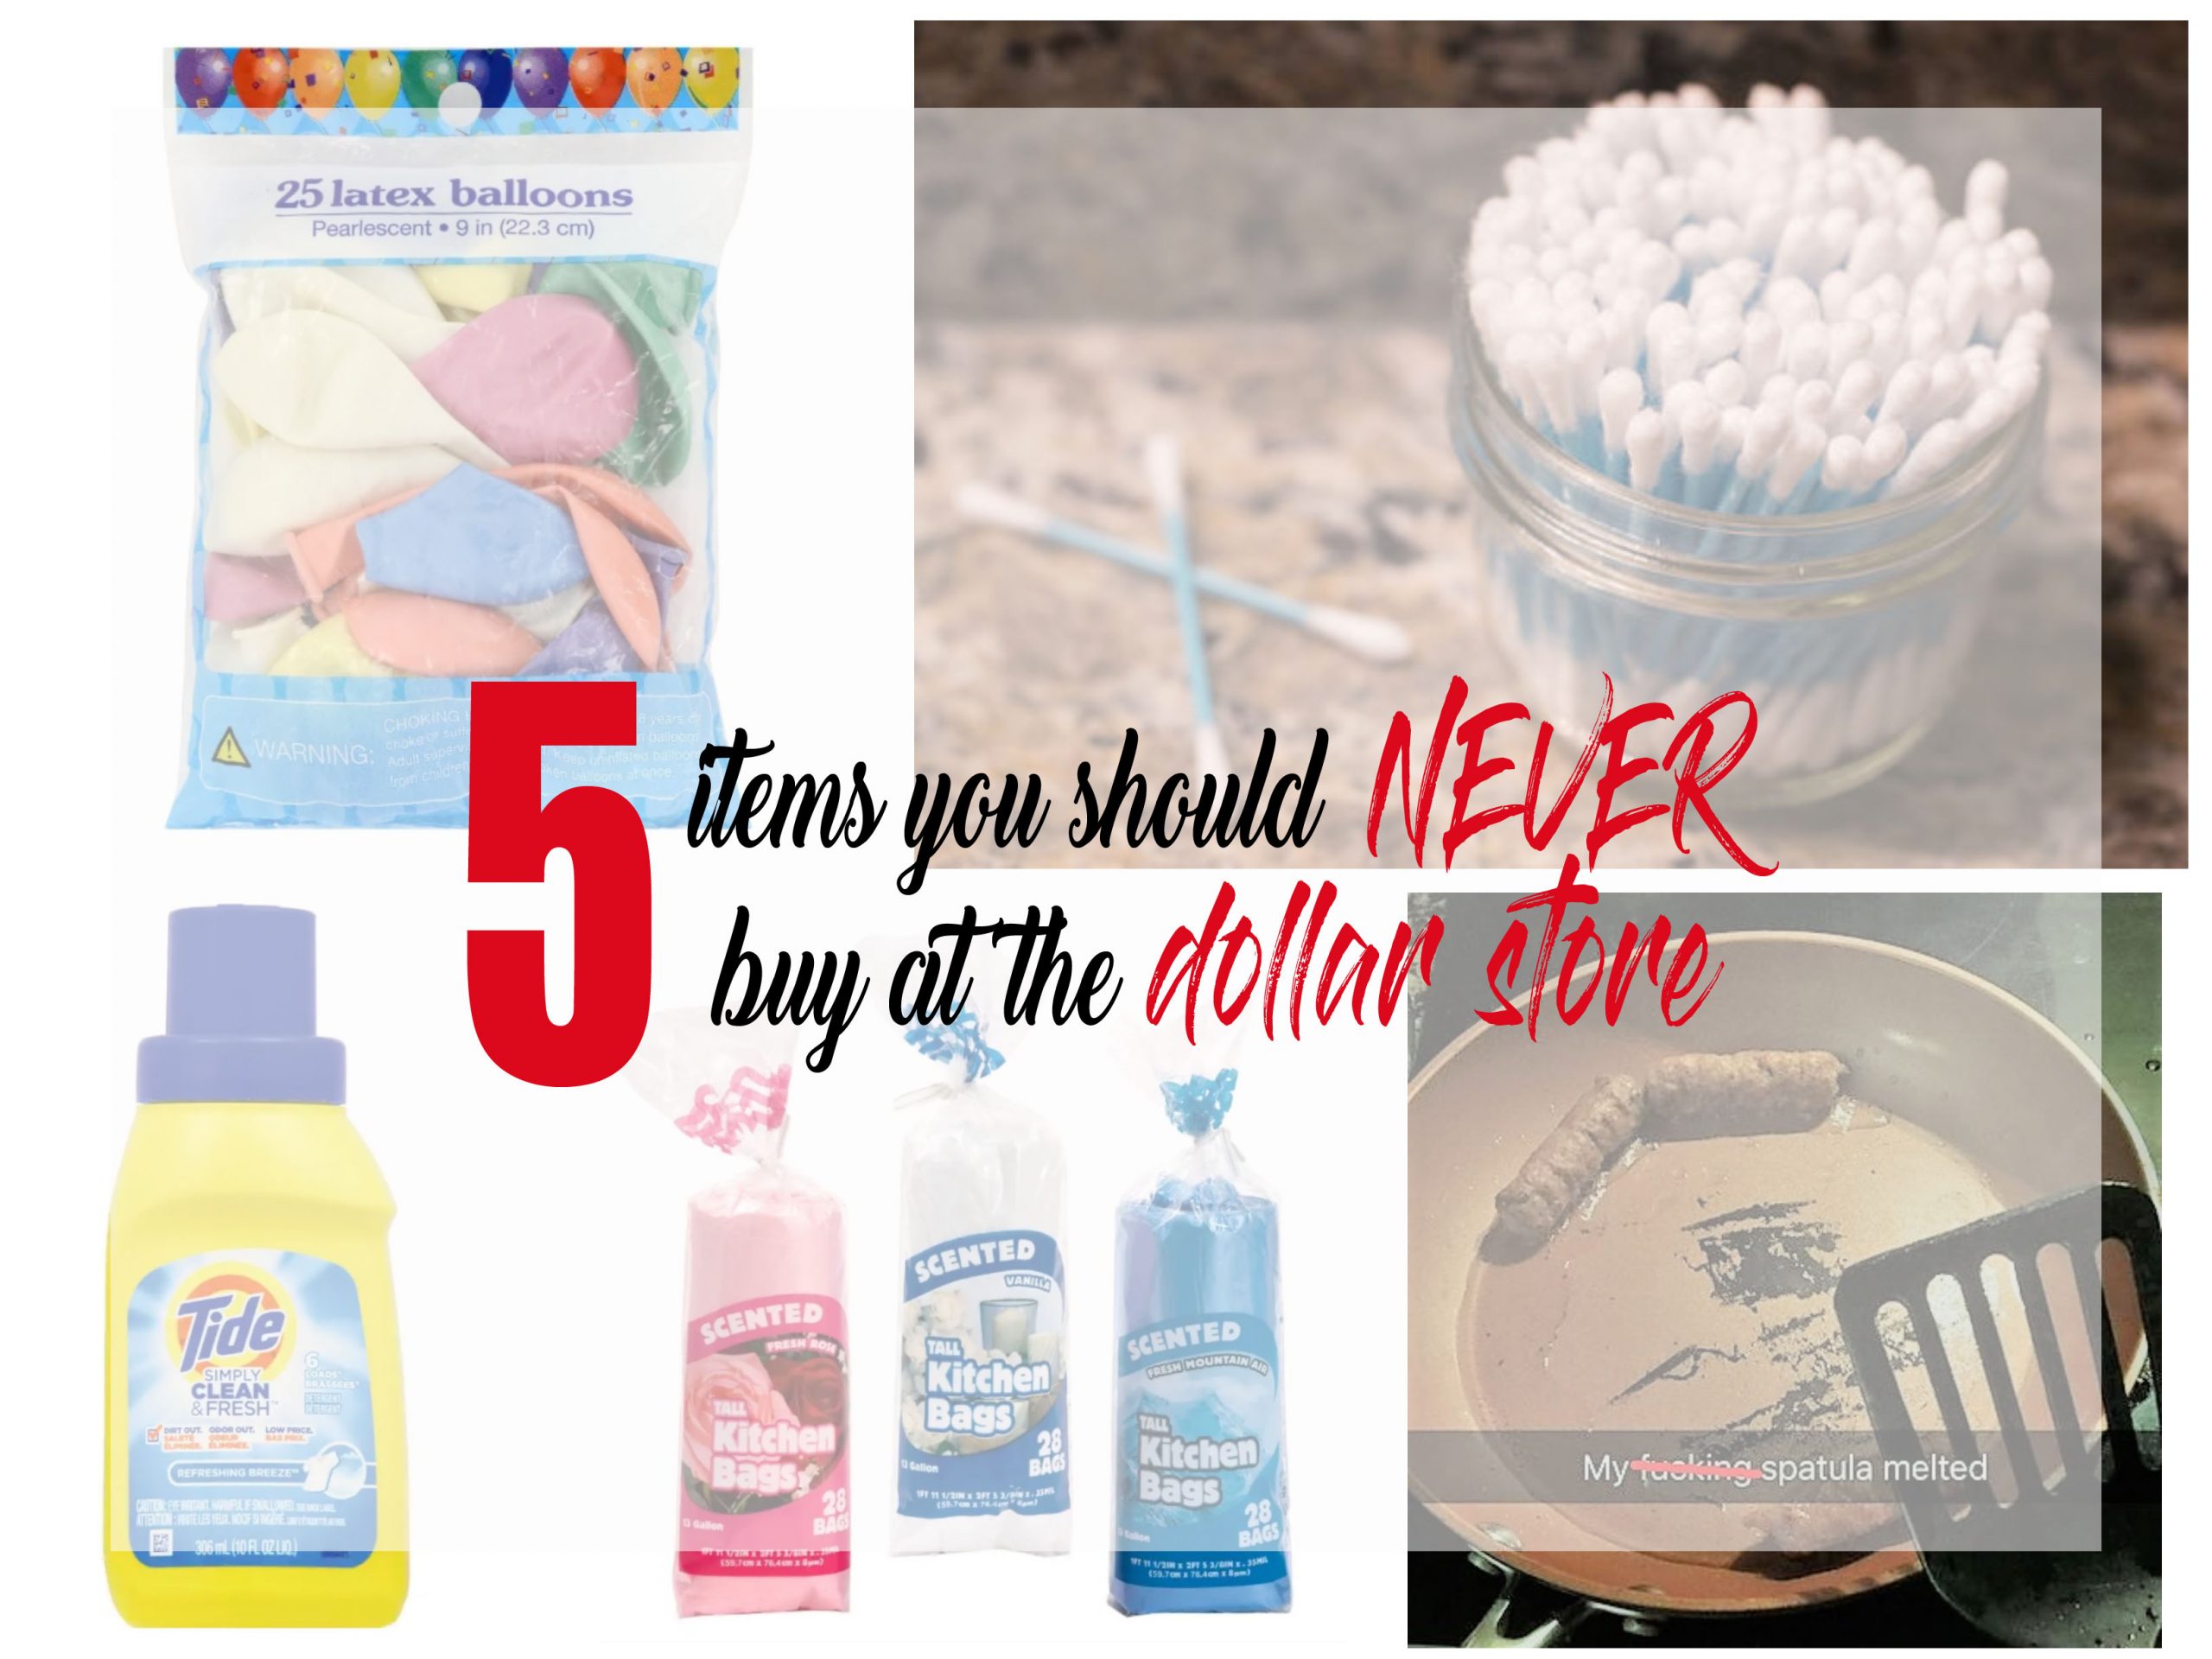 5 things you should NEVER buy at the dollar store.